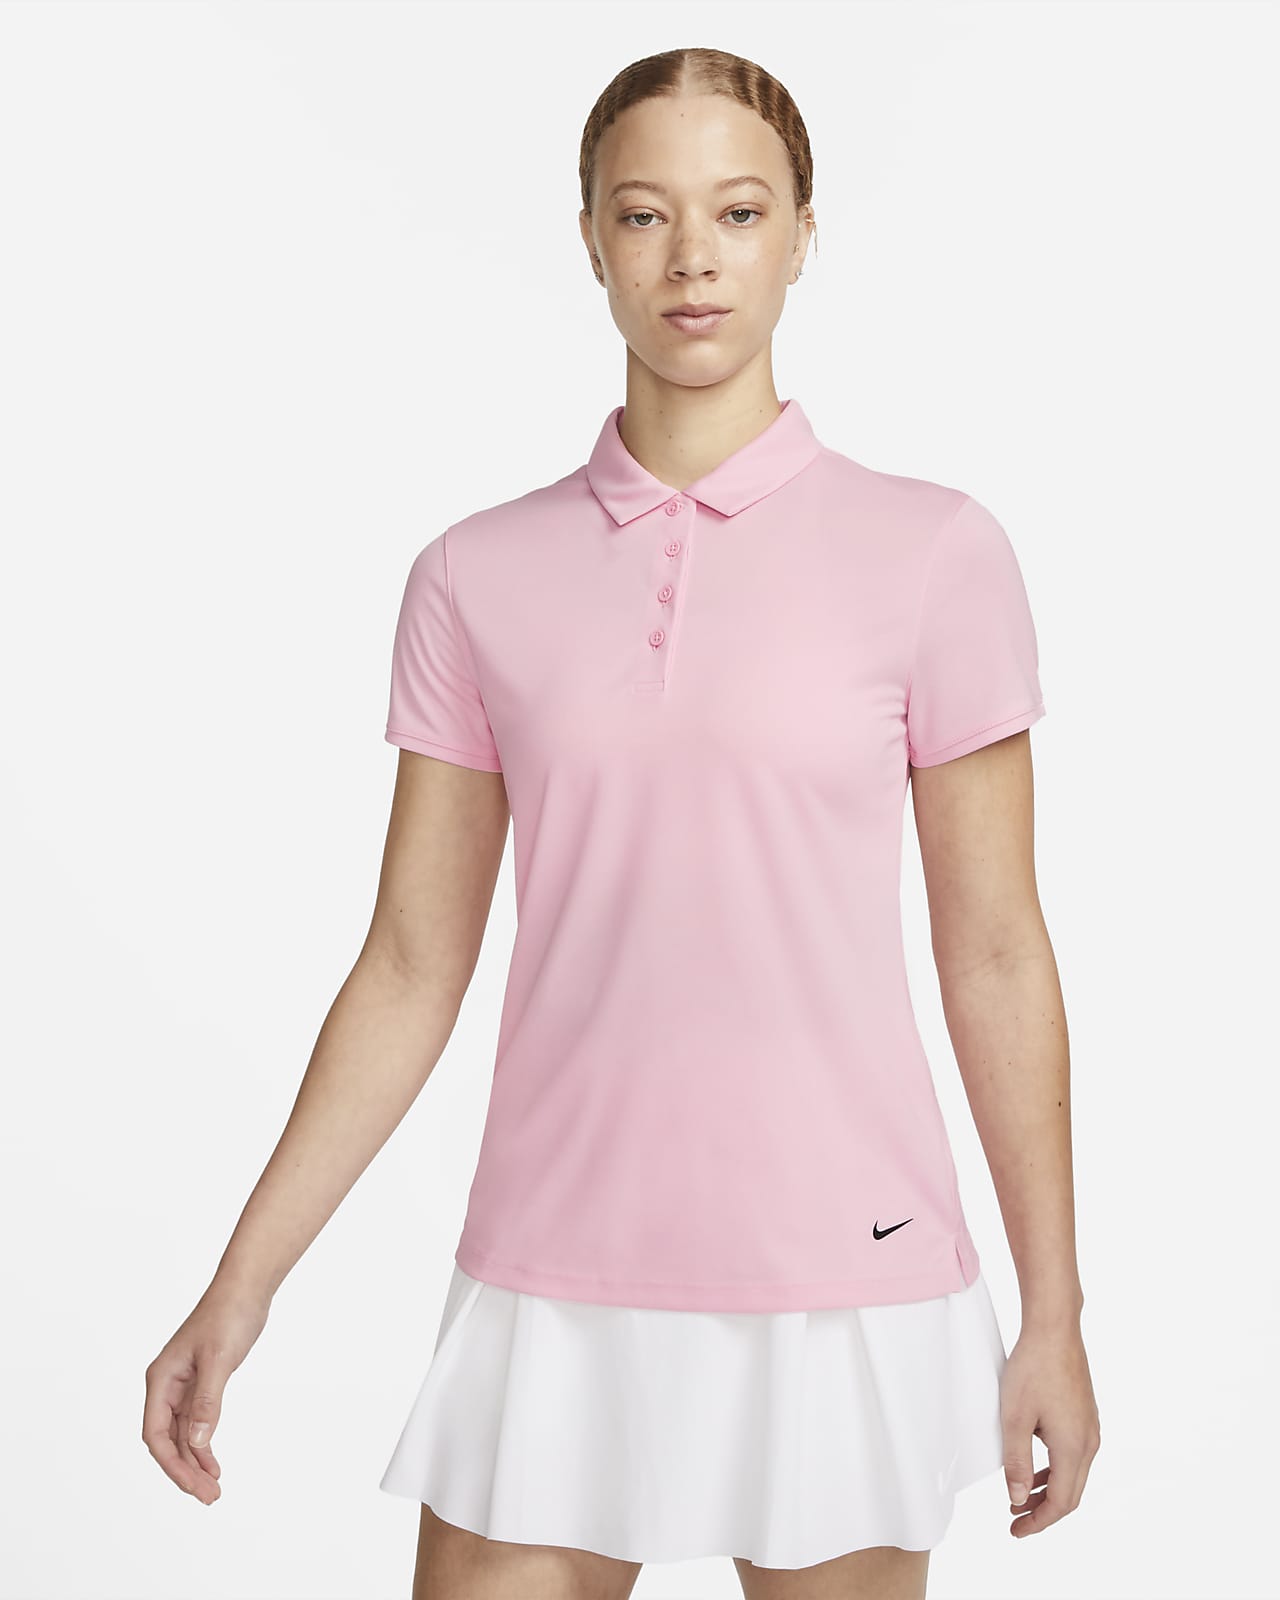 Post impressionisme klok Conclusie Nike Dri-FIT Victory Golfpolo voor dames. Nike NL